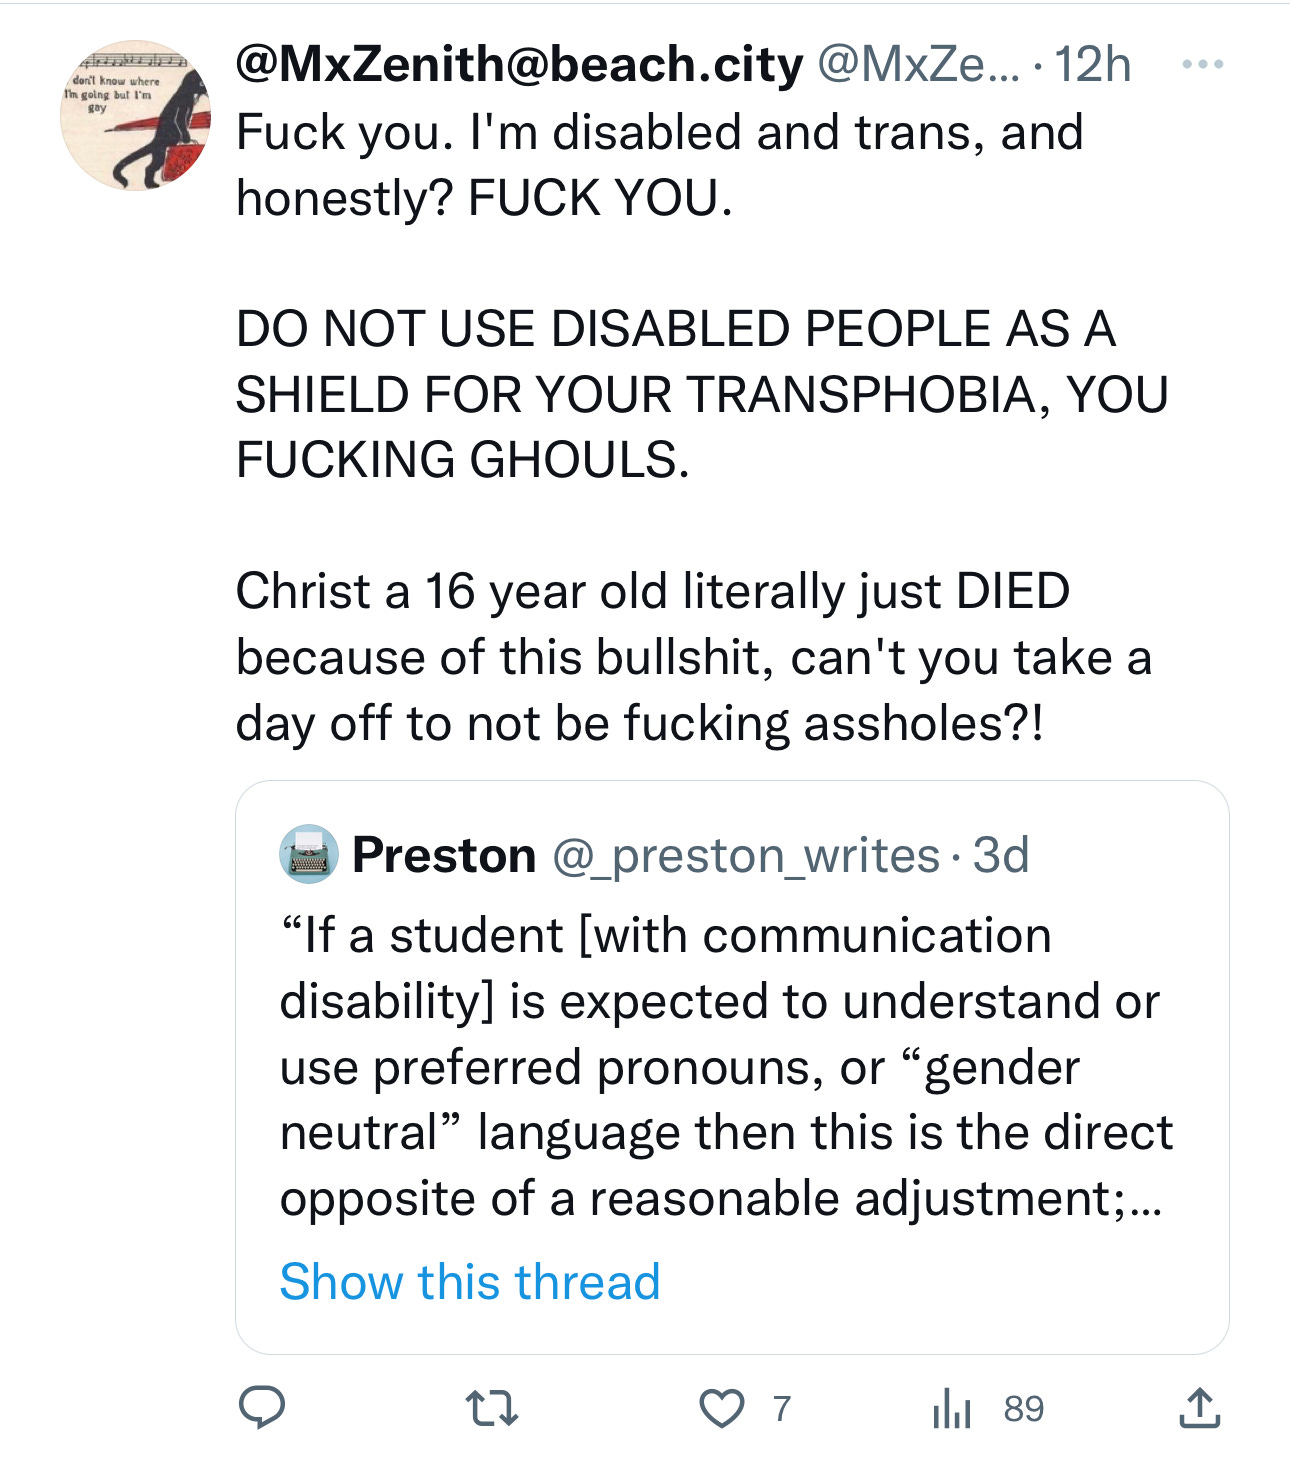 A quote tweet that states @MxZenith@beach.city @MxZe Fuck you. I'm disabled and trans, and honestly? FUCK YOU. DO NOT USE DISABLED PEOPLE AS A SHIELD FOR YOUR TRANSPHOBIA, YOU FUCKING GHOULS. Christ a 16 year old literally just DIED because of this bullshit, can't you take a day off to not be fucking assholes?! Preston @_preston_writes "If a student [with communication disability] is expected to understand or use preferred pronouns, or "gender neutral" language then this is the direct opposite of a reasonable adjustment